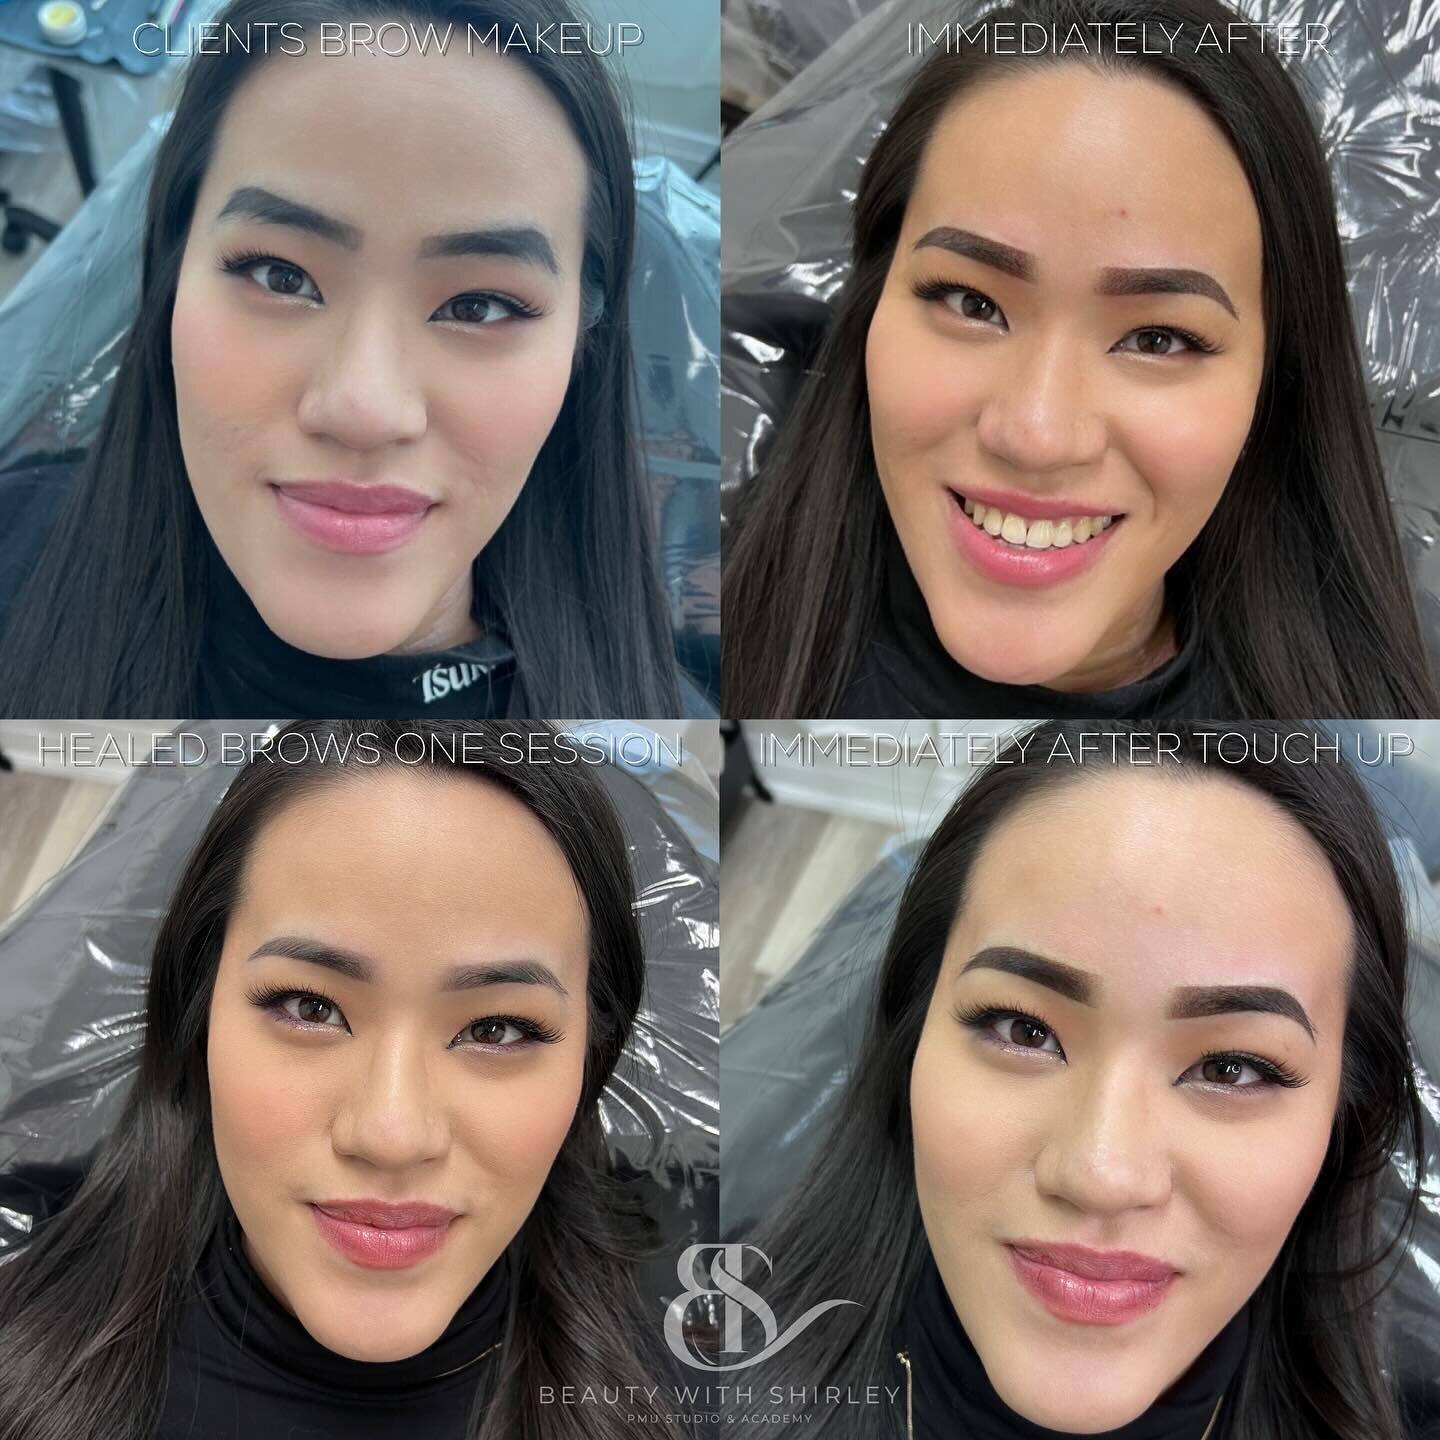 Good brows DO make a a huge difference in your whole facial features.

It can make you look:
✅ 𝒚𝒐𝒖𝒏𝒈𝒆𝒓 by creating a beautiful shape that suits your face 
✅ 𝒂𝒘𝒂𝒌𝒆 by lifting your eyebrows and not having them droopy
✅ 𝒍𝒆𝒔𝒔 𝒂𝒏𝒈𝒓𝒚  